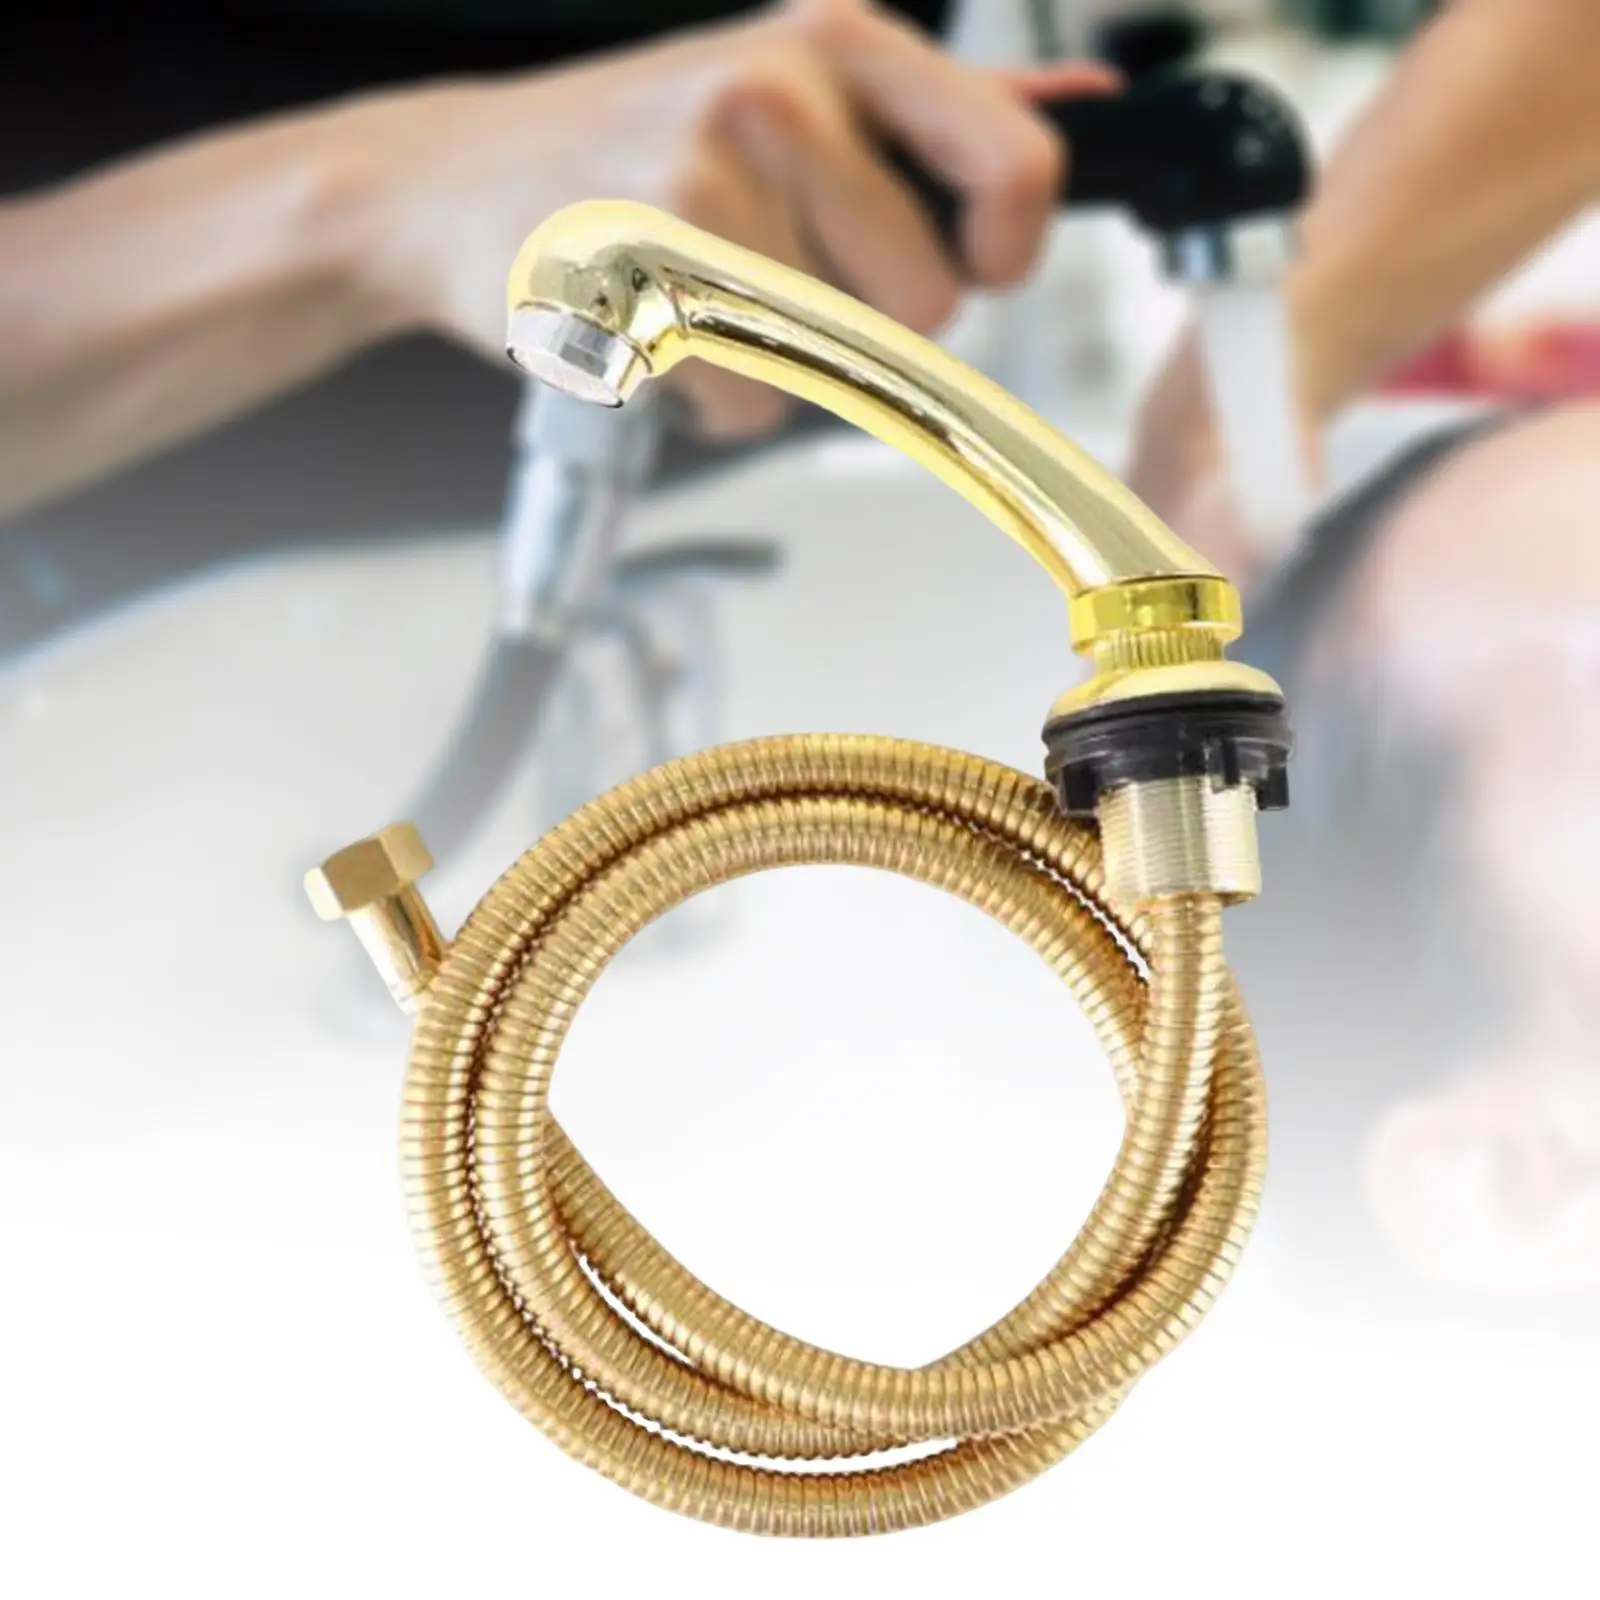 Shampoo Bow Sink Basin Faucet Sprayer with Hose Equipment, Beauty Salon Repalcement for Hairdresser Babershop